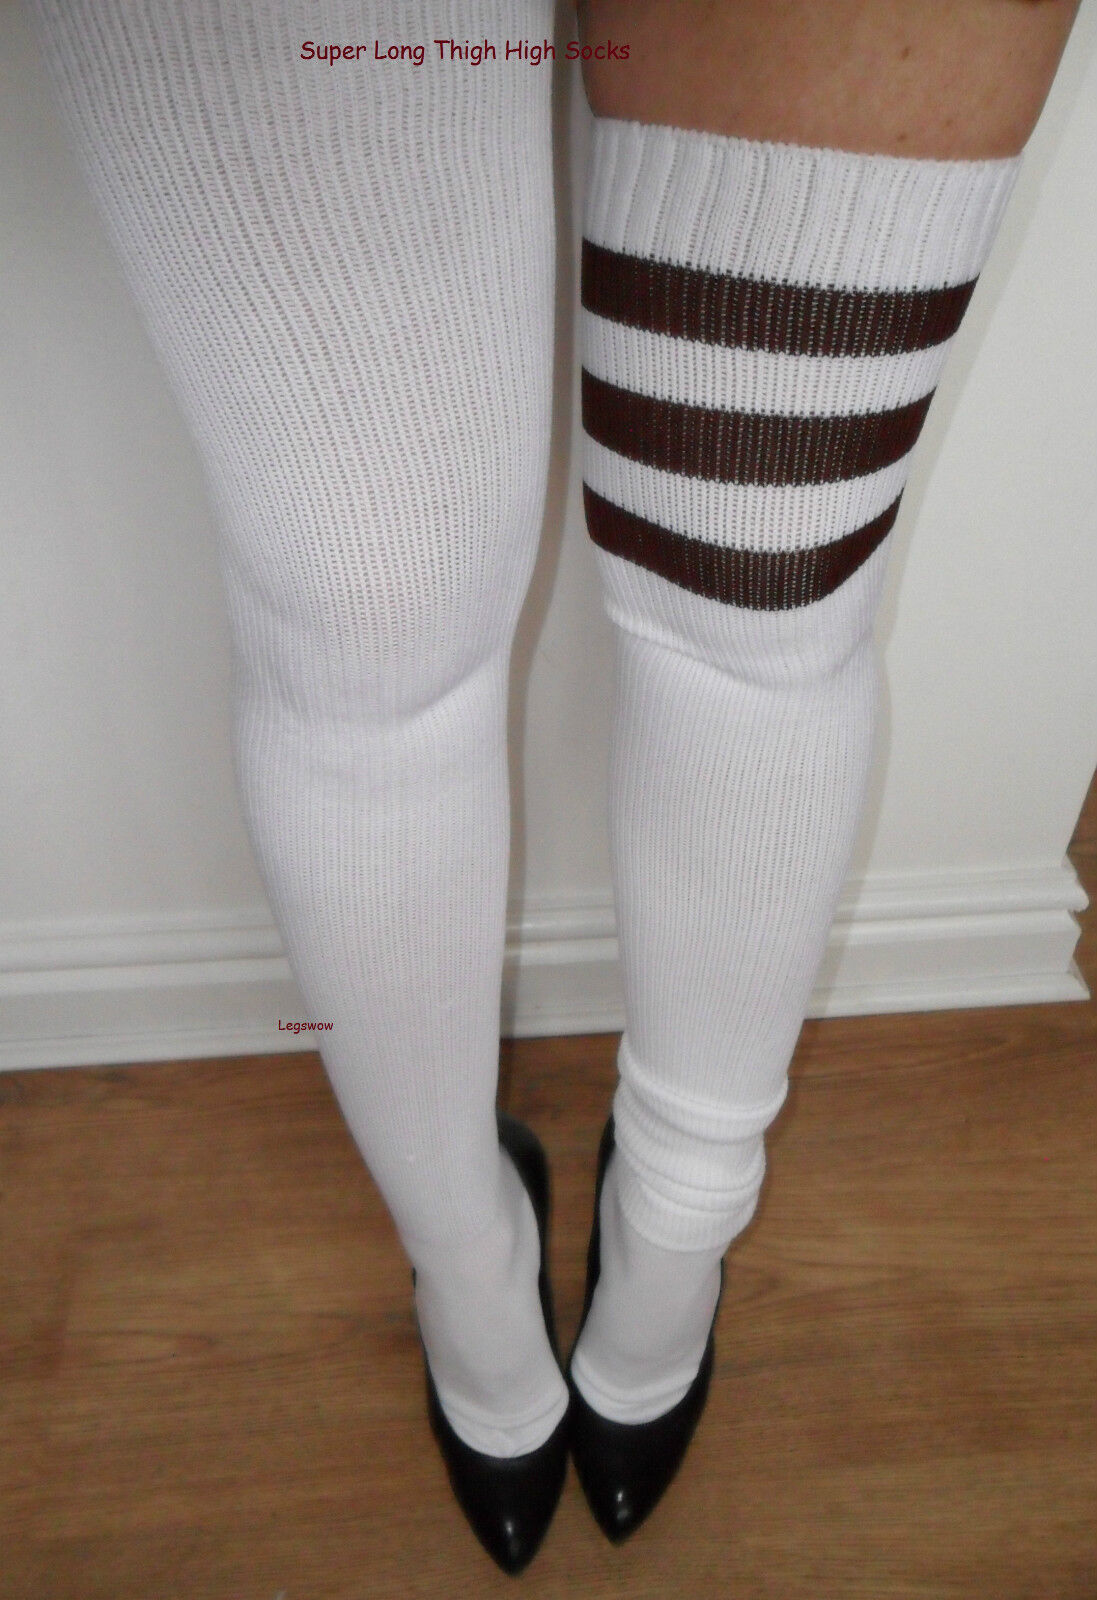 david sis recommends thigh high sock fetish pic